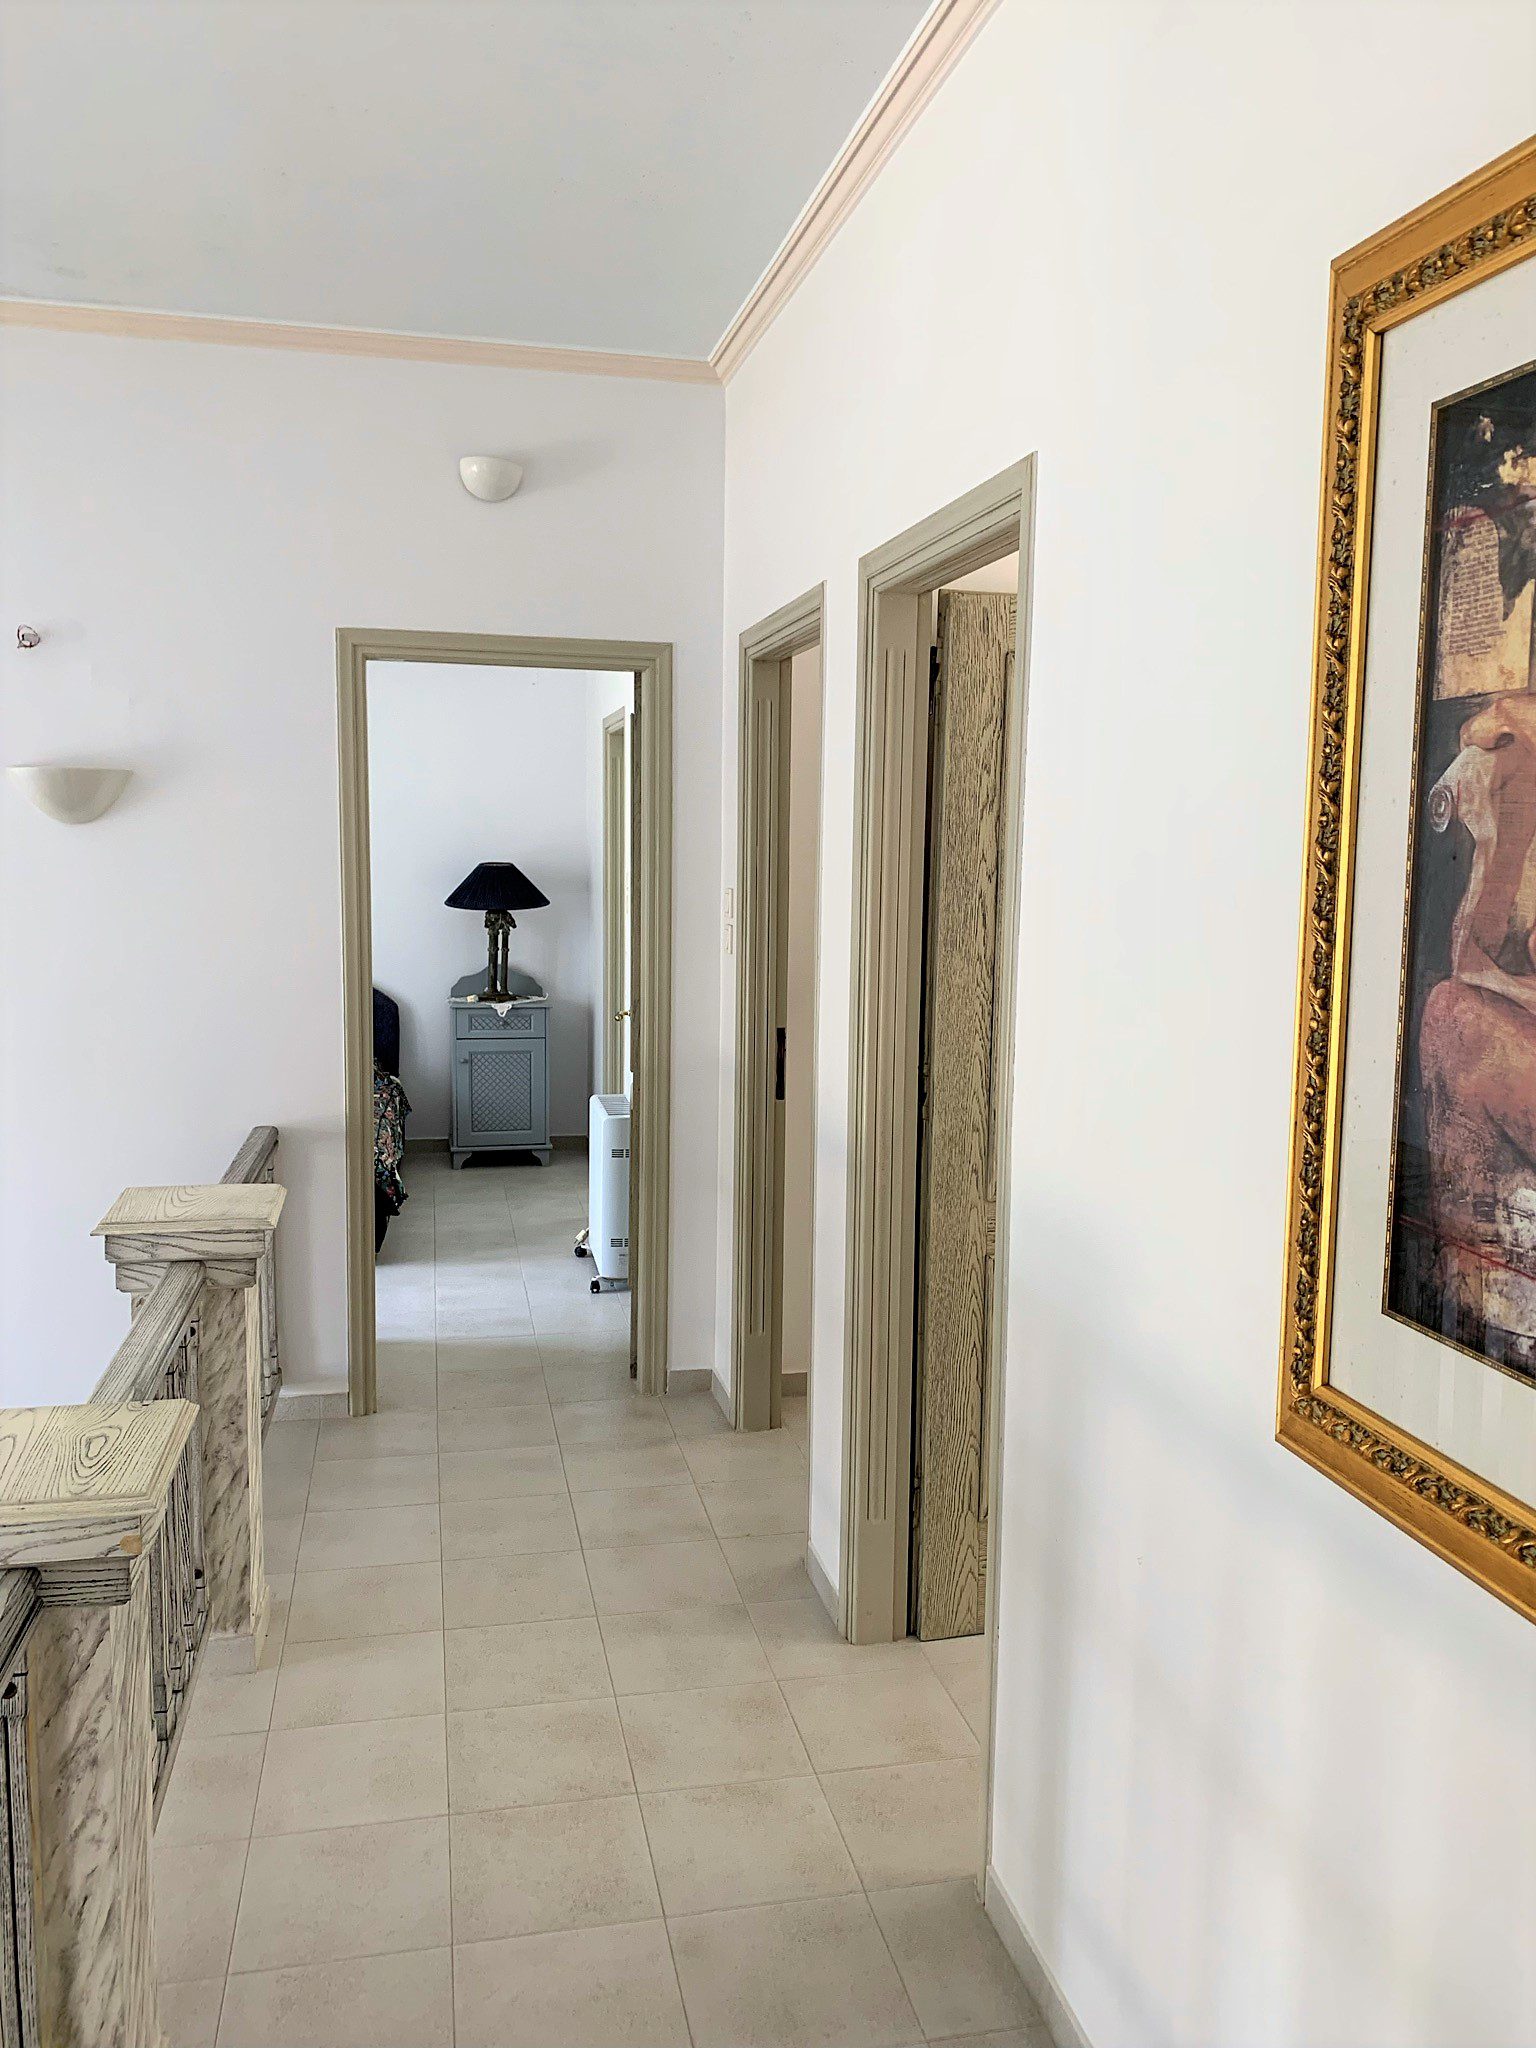 Passage way leading to rooms of house for sale Ithaca Greece, Aetos